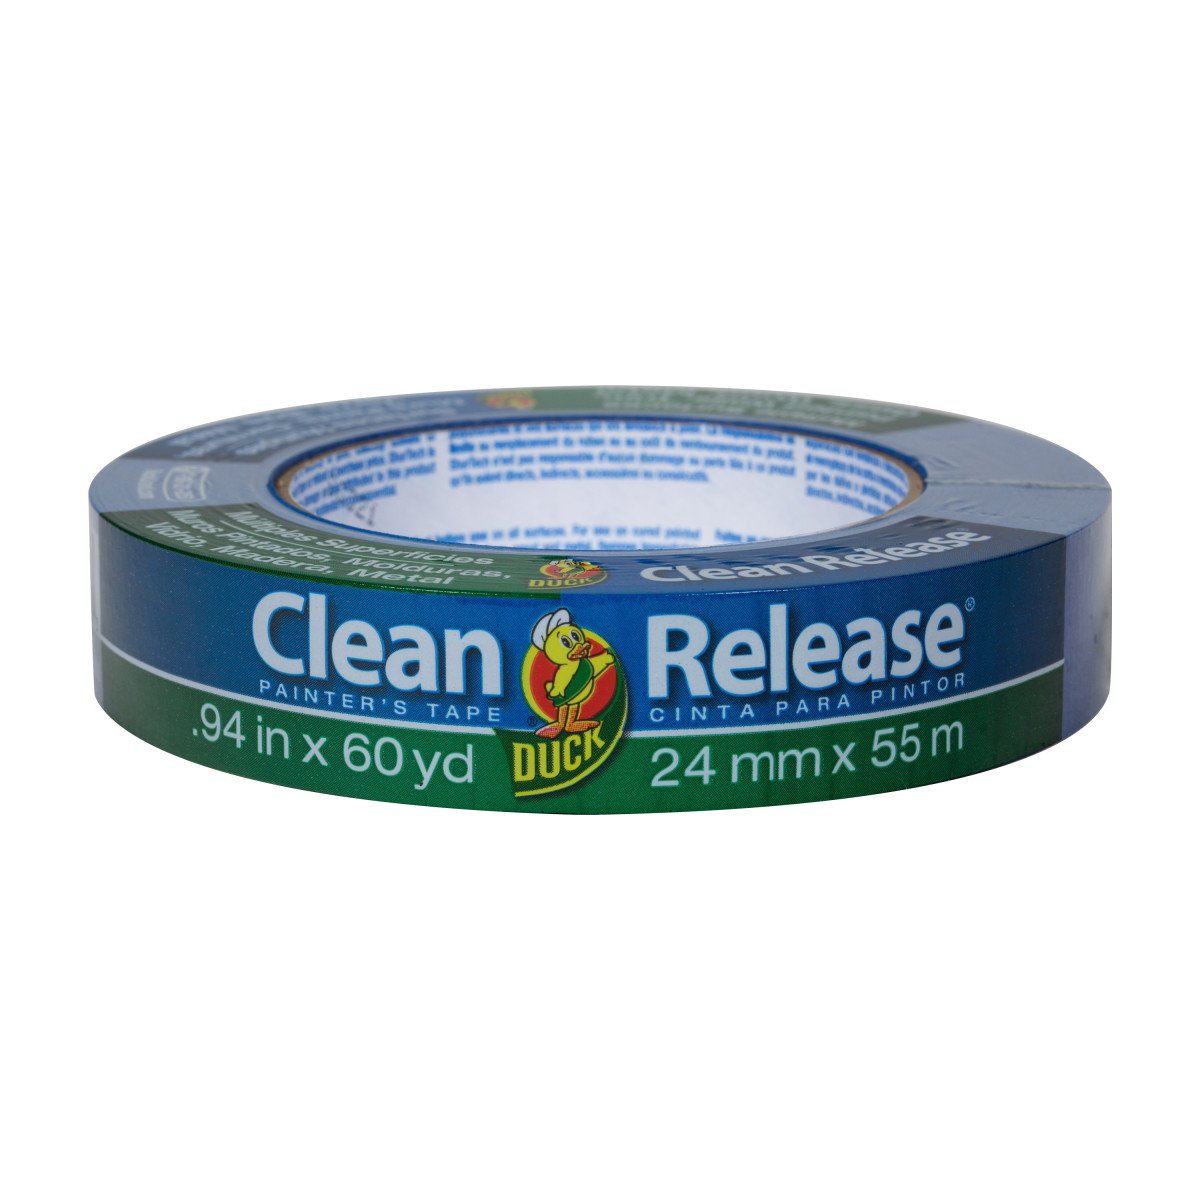 Duck Clean Release Blue Painter's Tape - Shop Adhesives & Tape at H-E-B